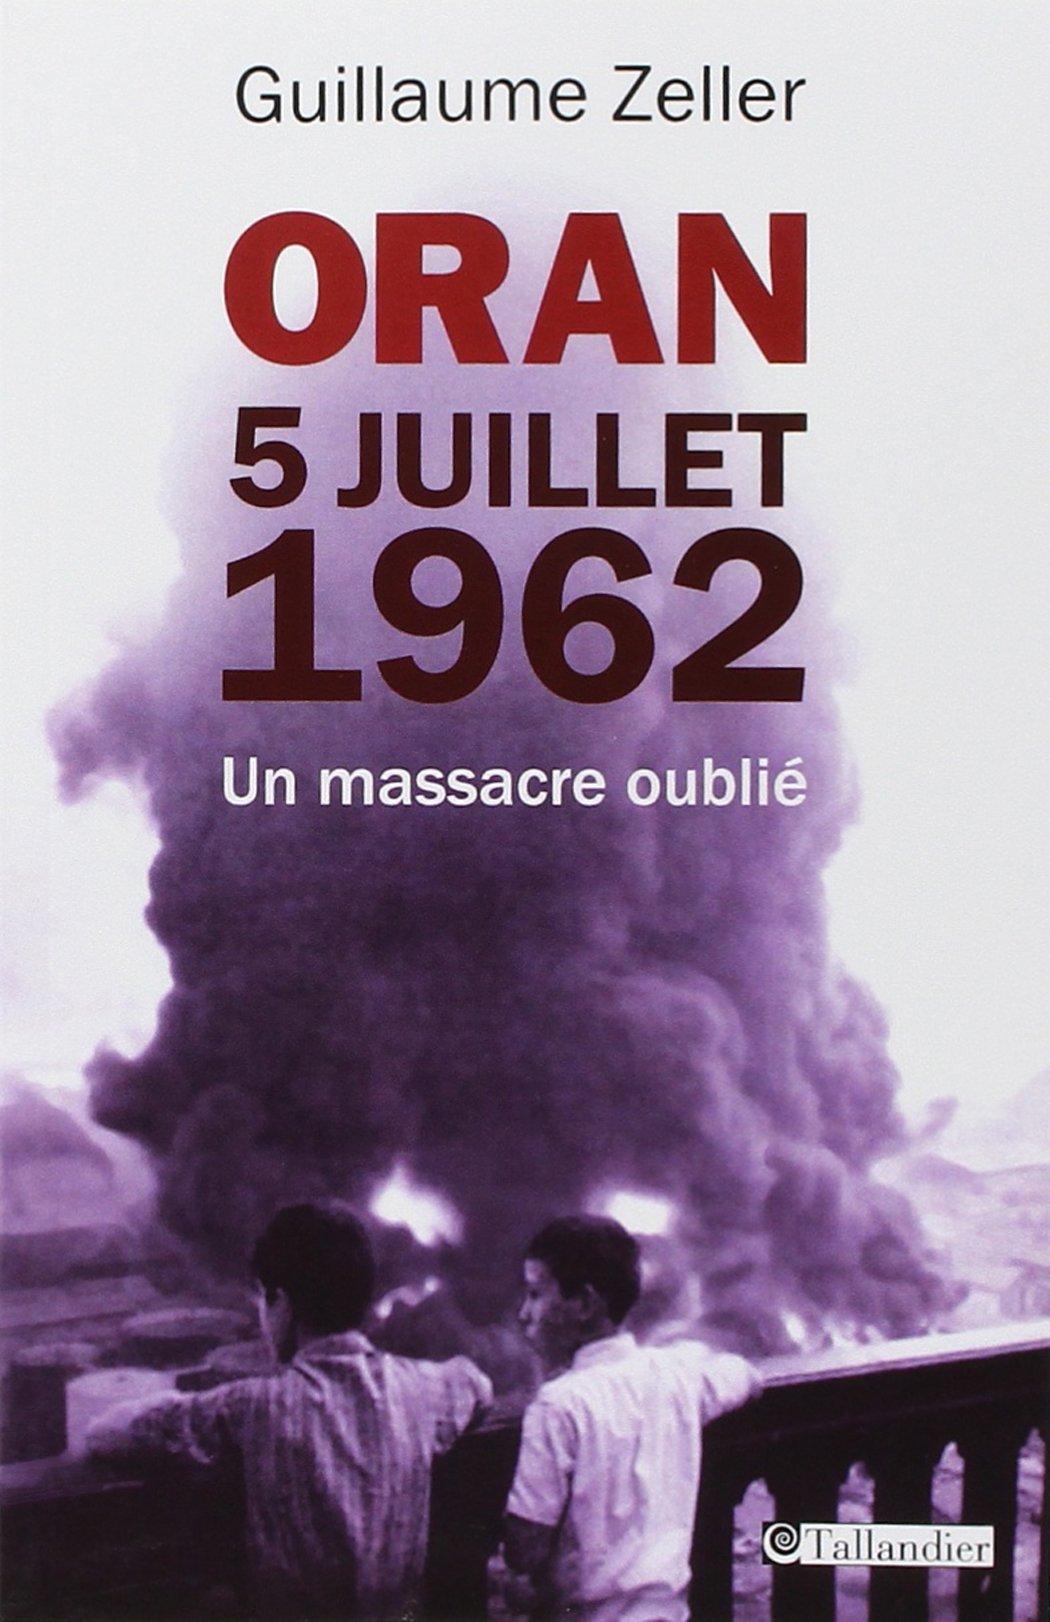 July 5, 1962 in Oran: the forgotten massacre of hundreds of Europeans from Algeria